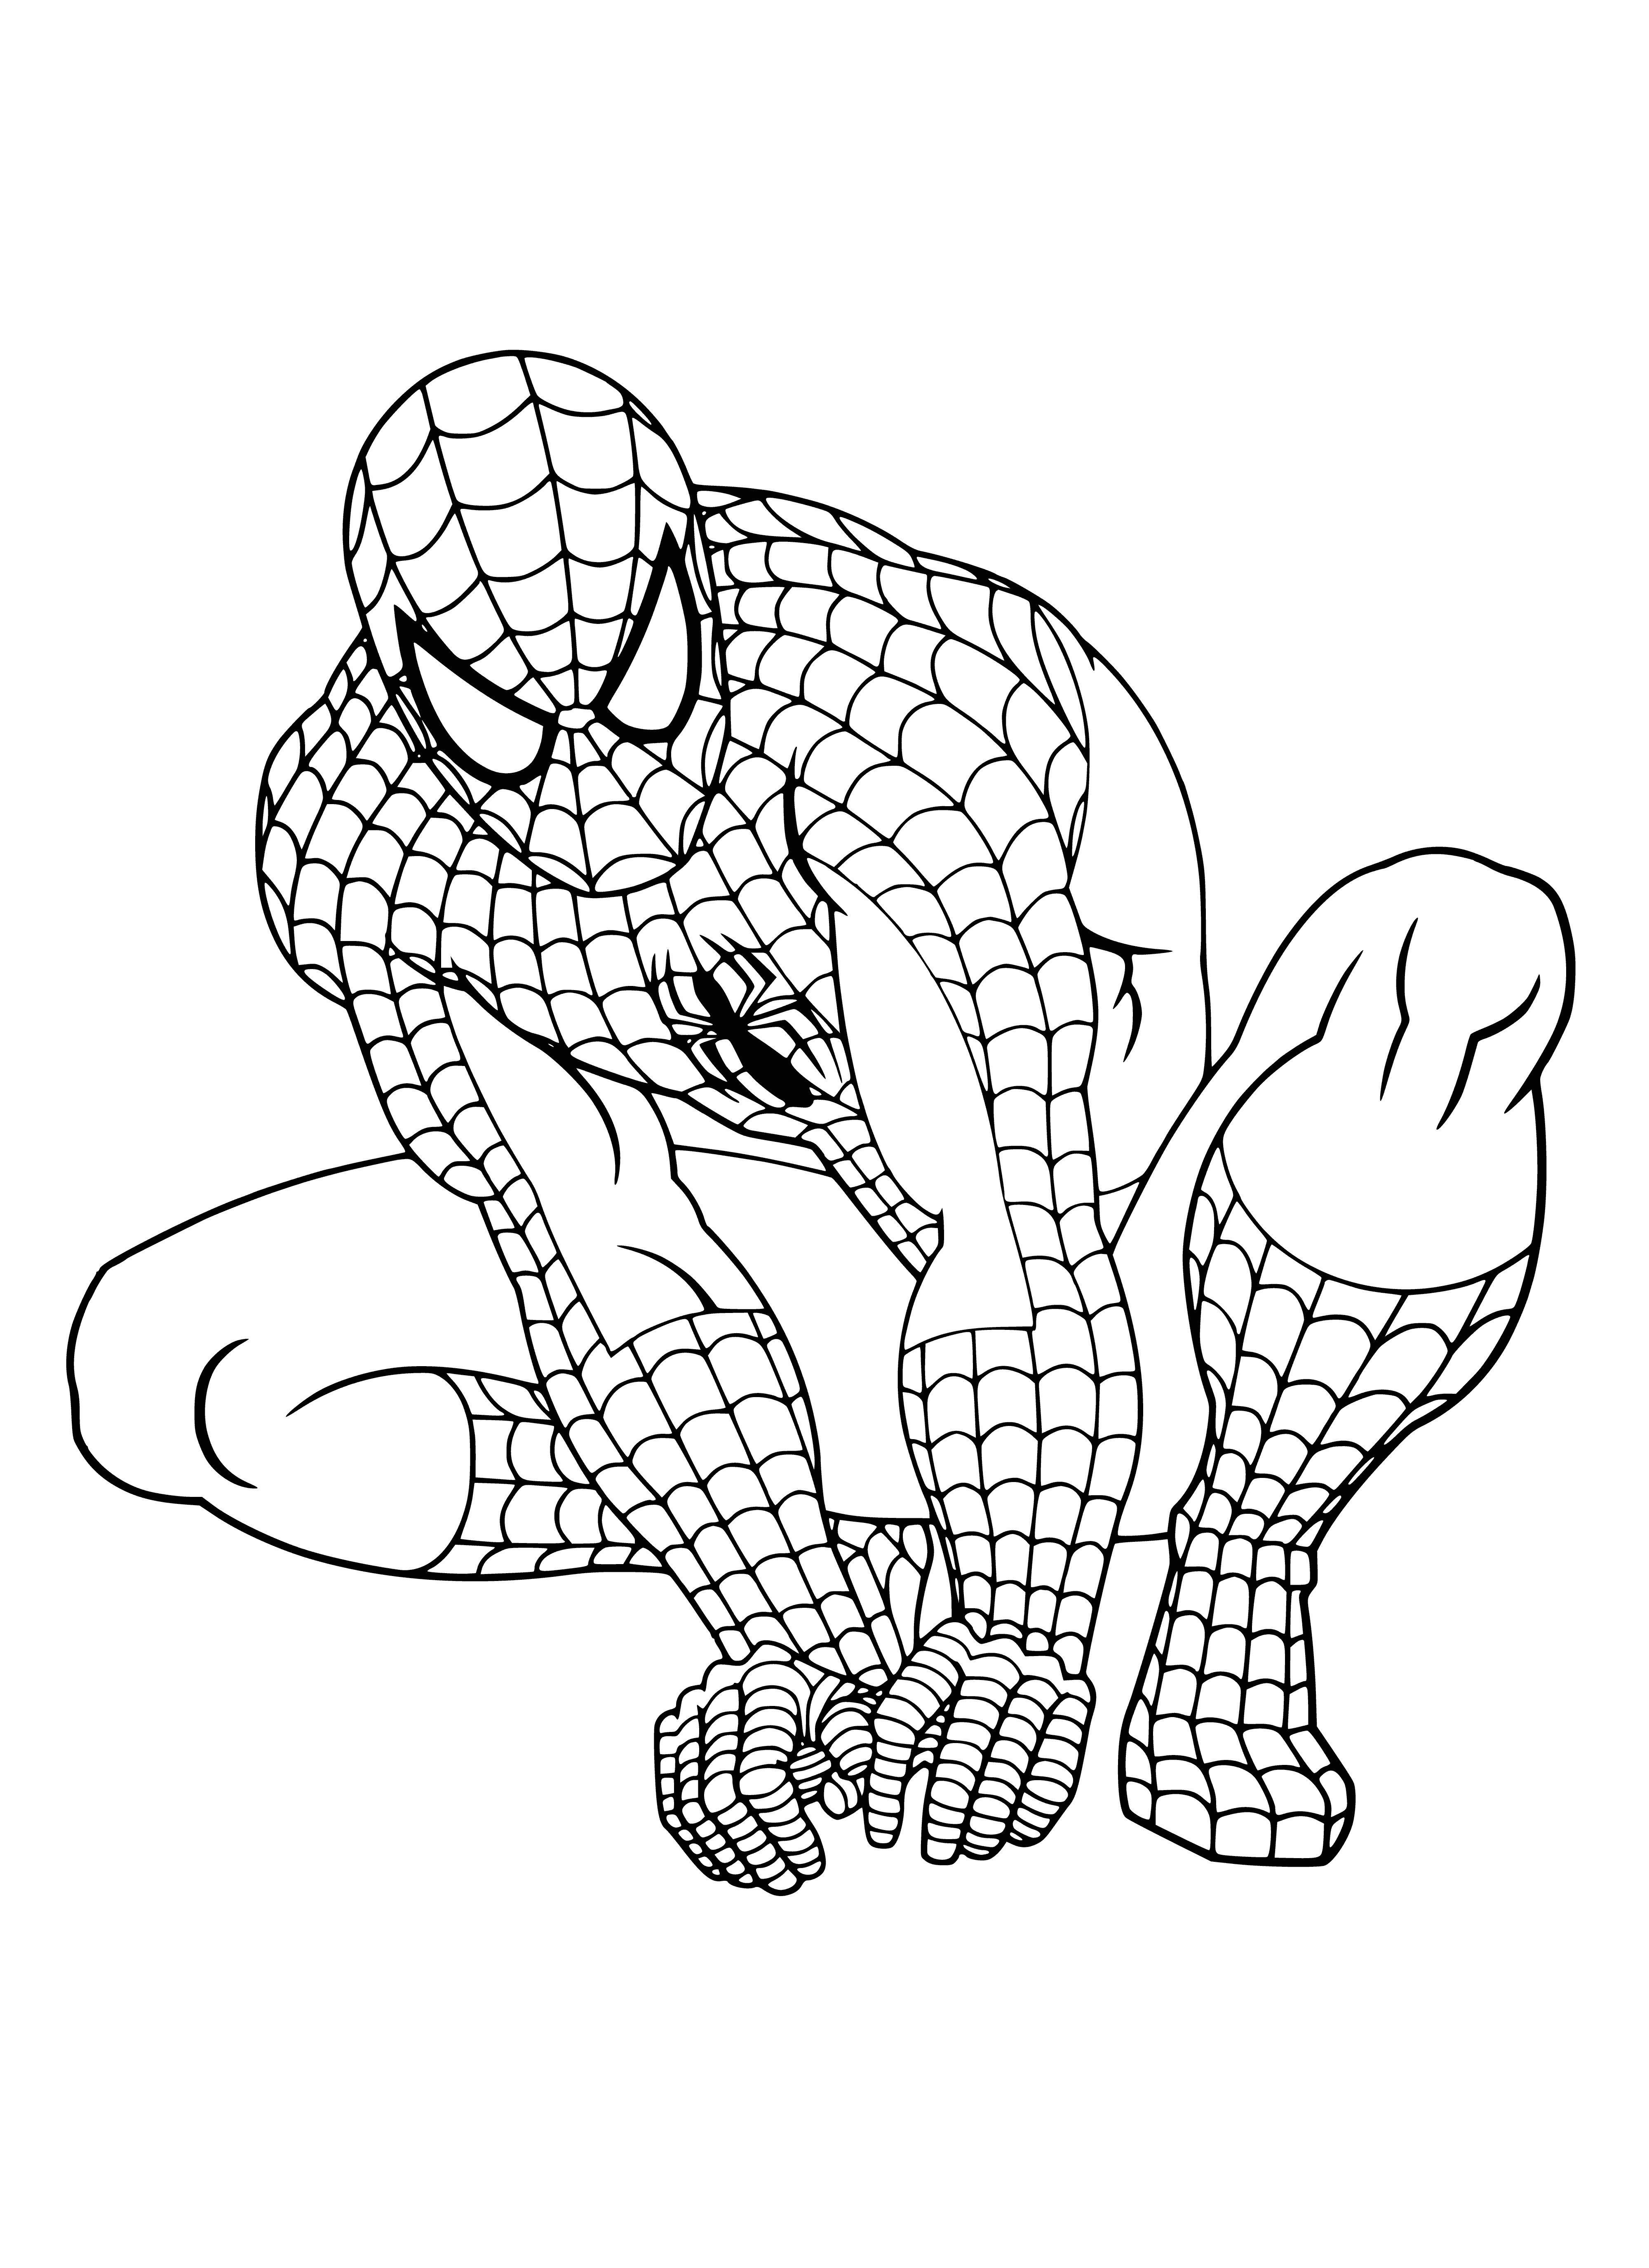 coloring page: Spiderman, Peter Parker, fights crime with superhuman agility & strength wearing red & blue suit & black mask. #Superhero